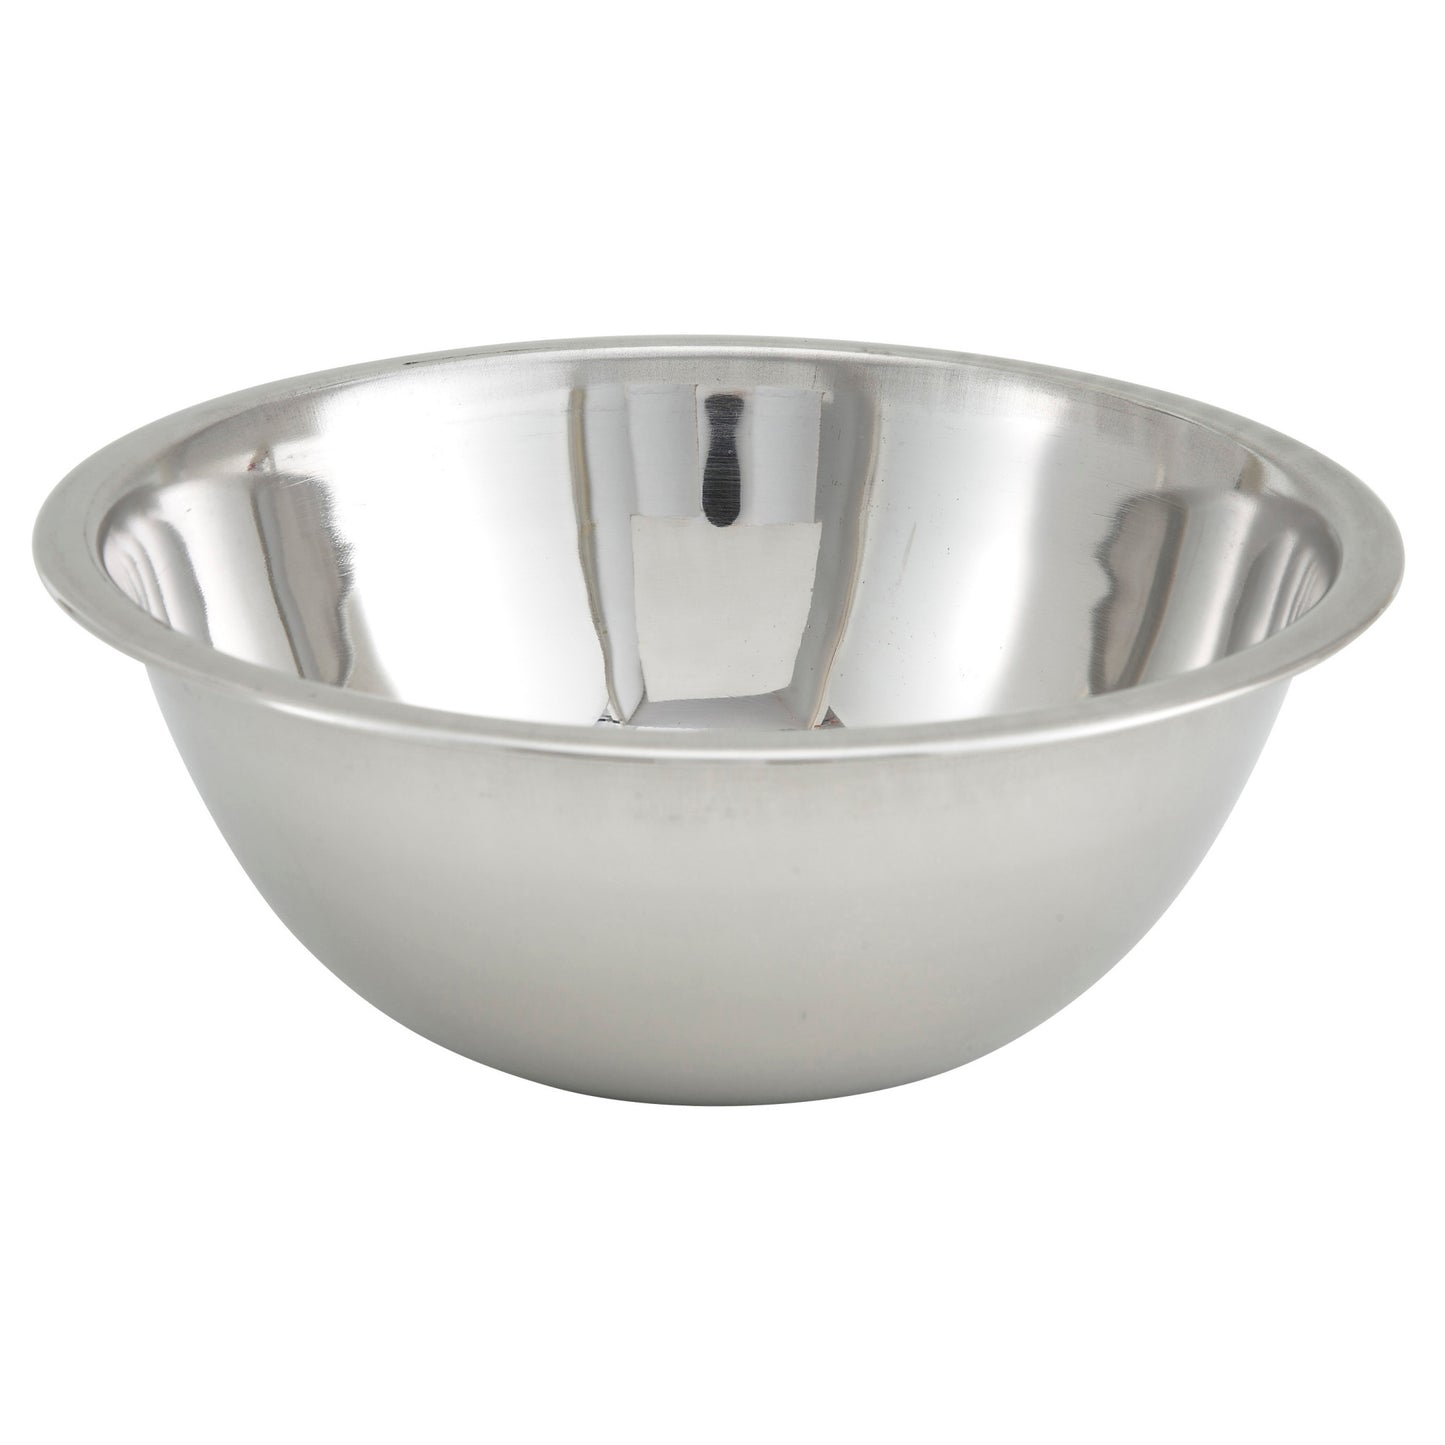 MXBT-75Q - All-Purpose True Capacity Mixing Bowl, Stainless Steel - 3/4 Quart